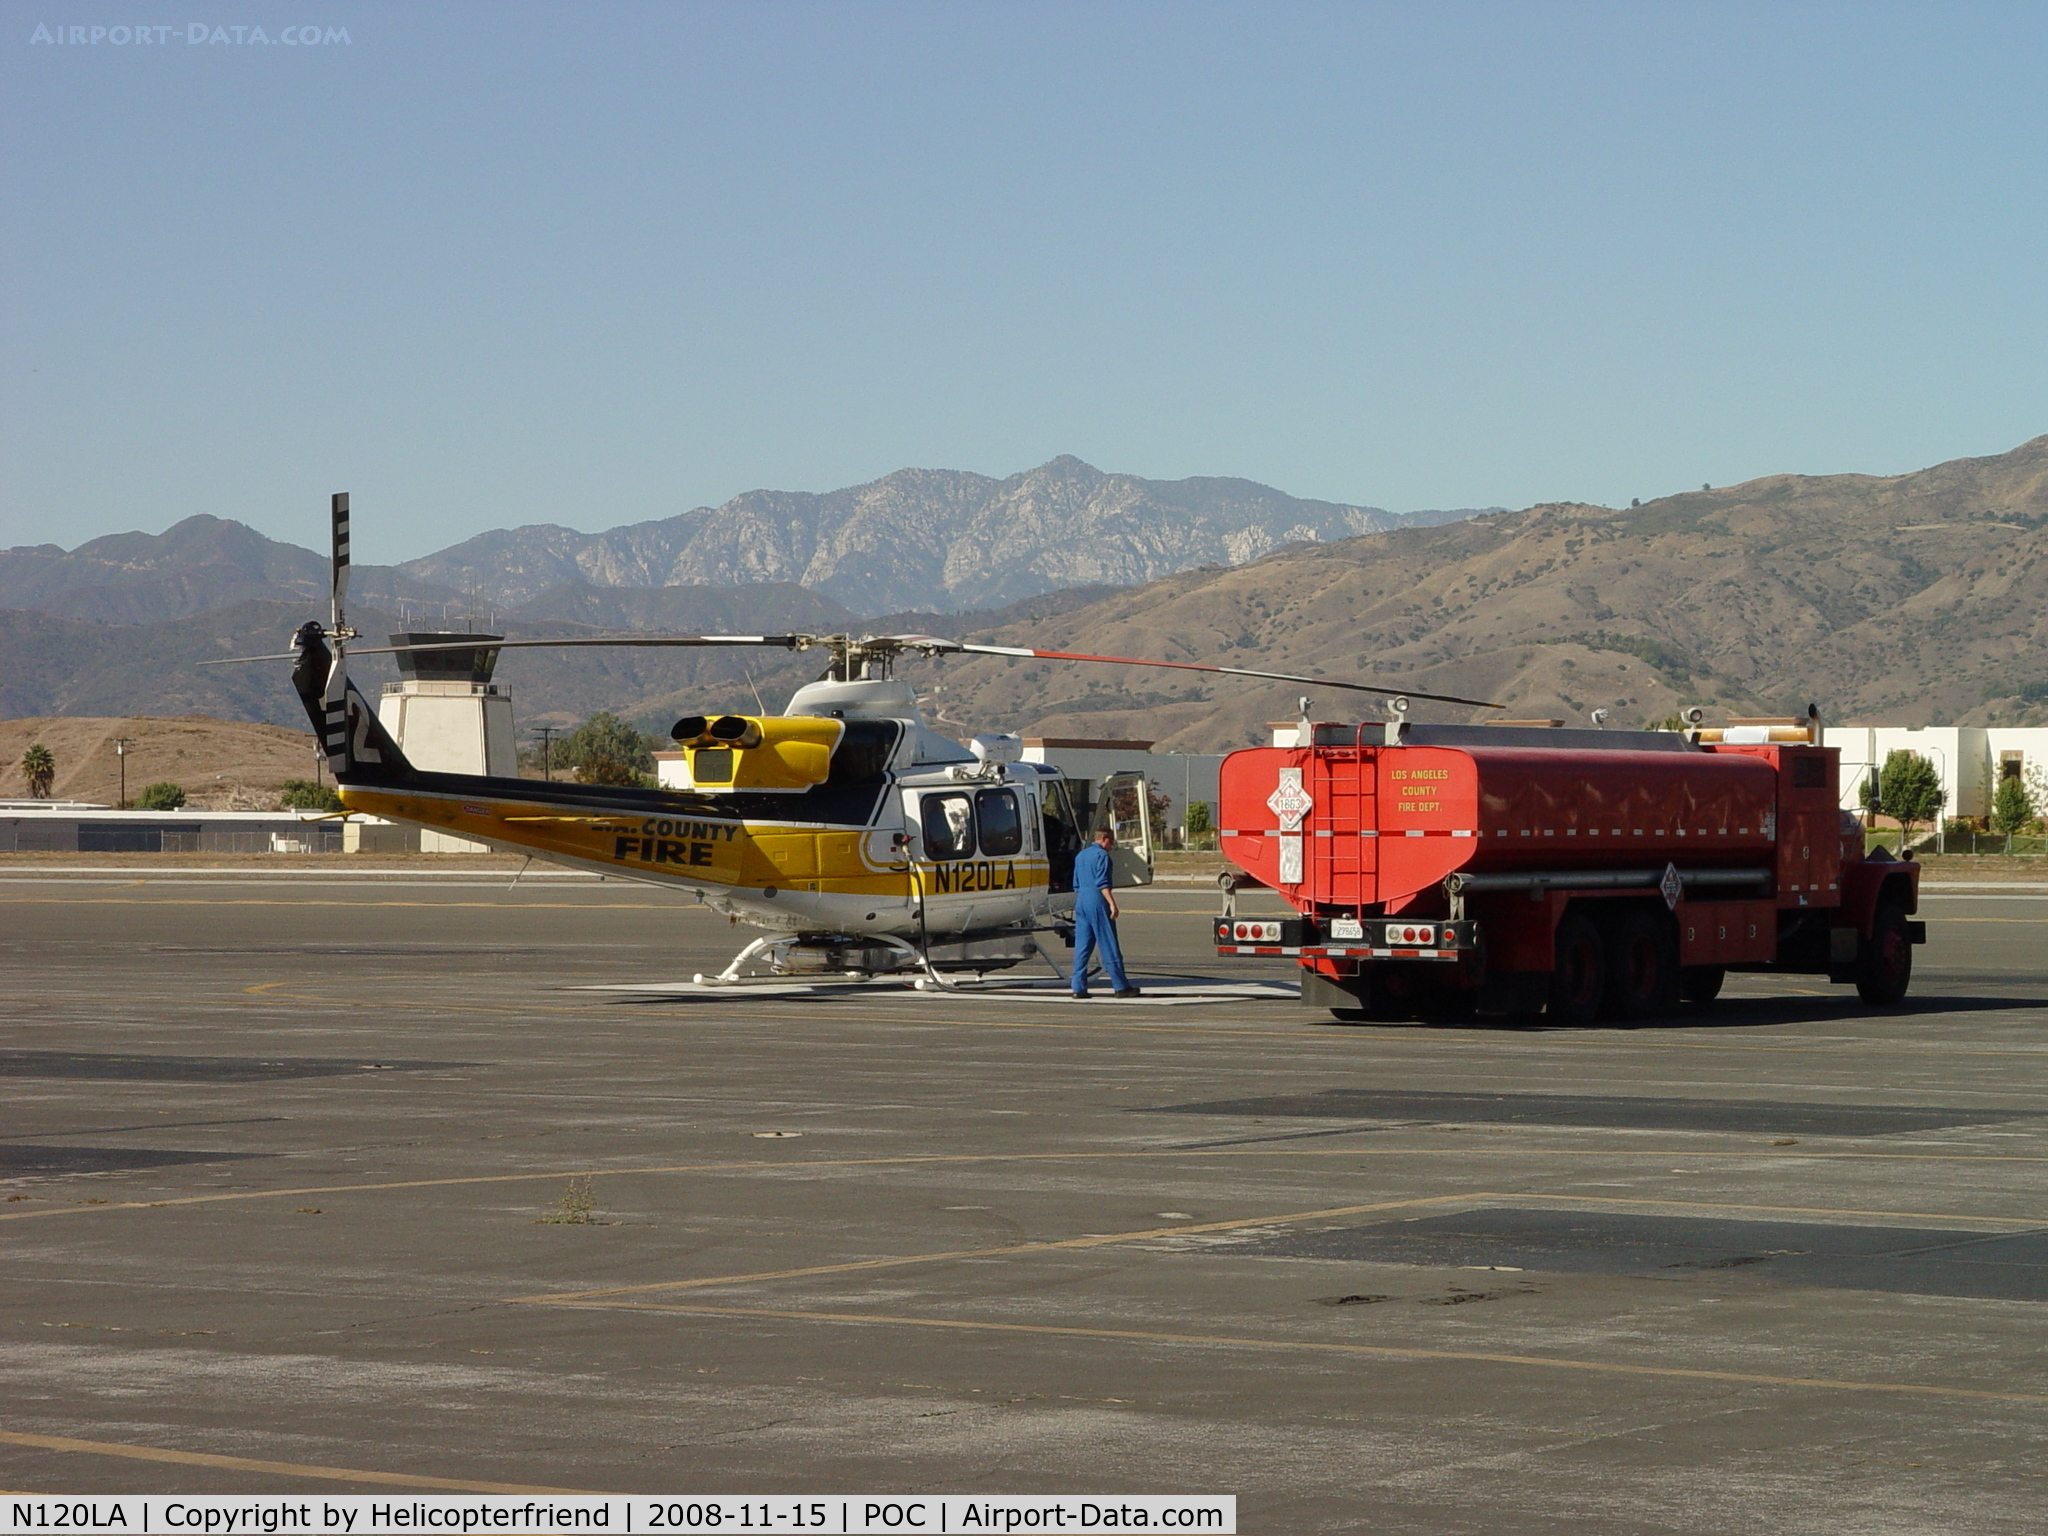 N120LA, 2007 Bell 412EP C/N 36455, Fueling bird to go and assist with fires